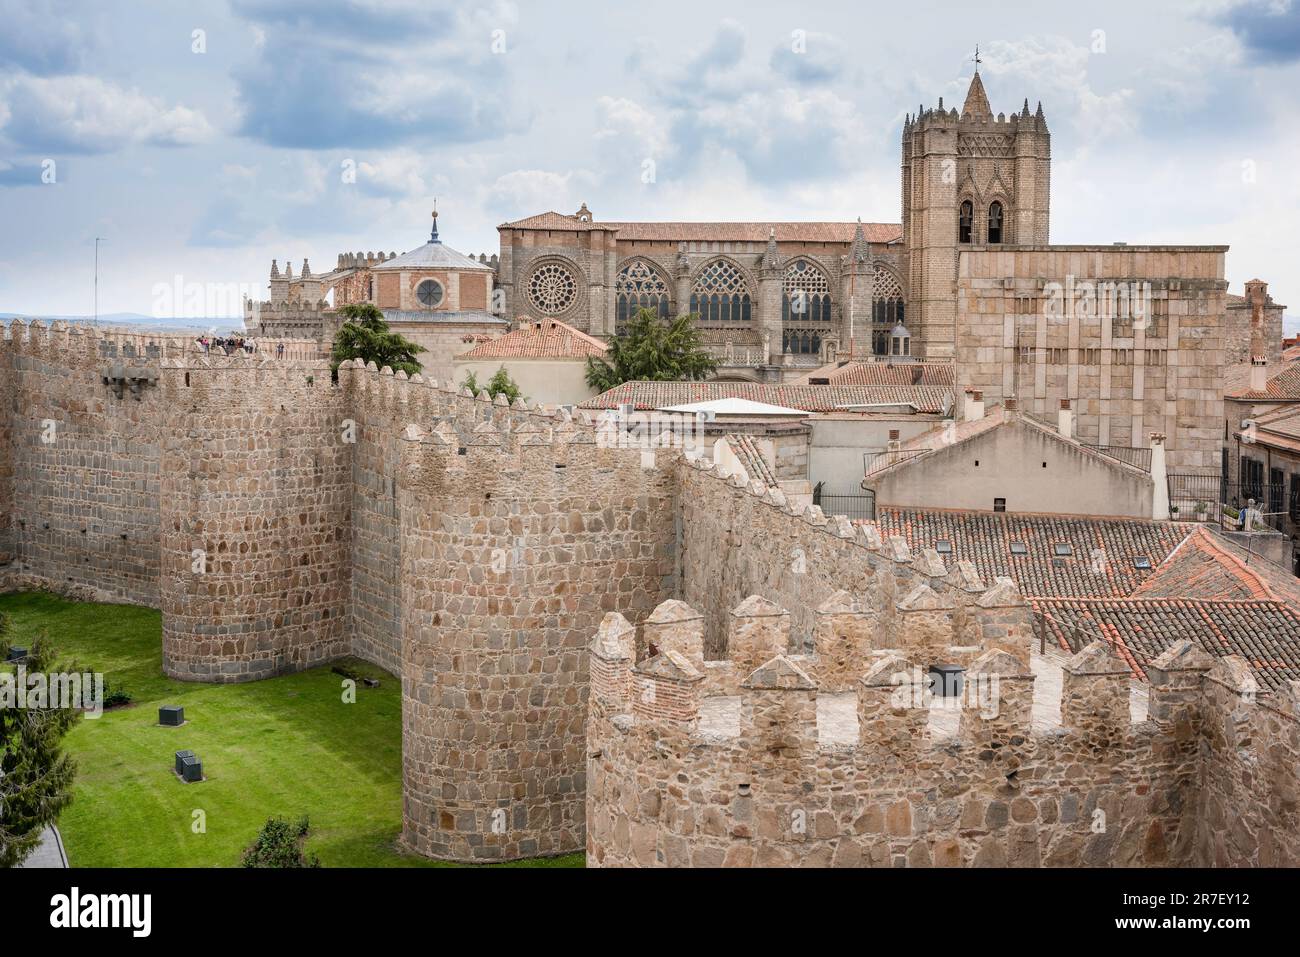 Avila Spain, view across the huge medieval wall that encircles the medieval city of Avila showing the Catedral de Avila on the skyline, Central Spain Stock Photo